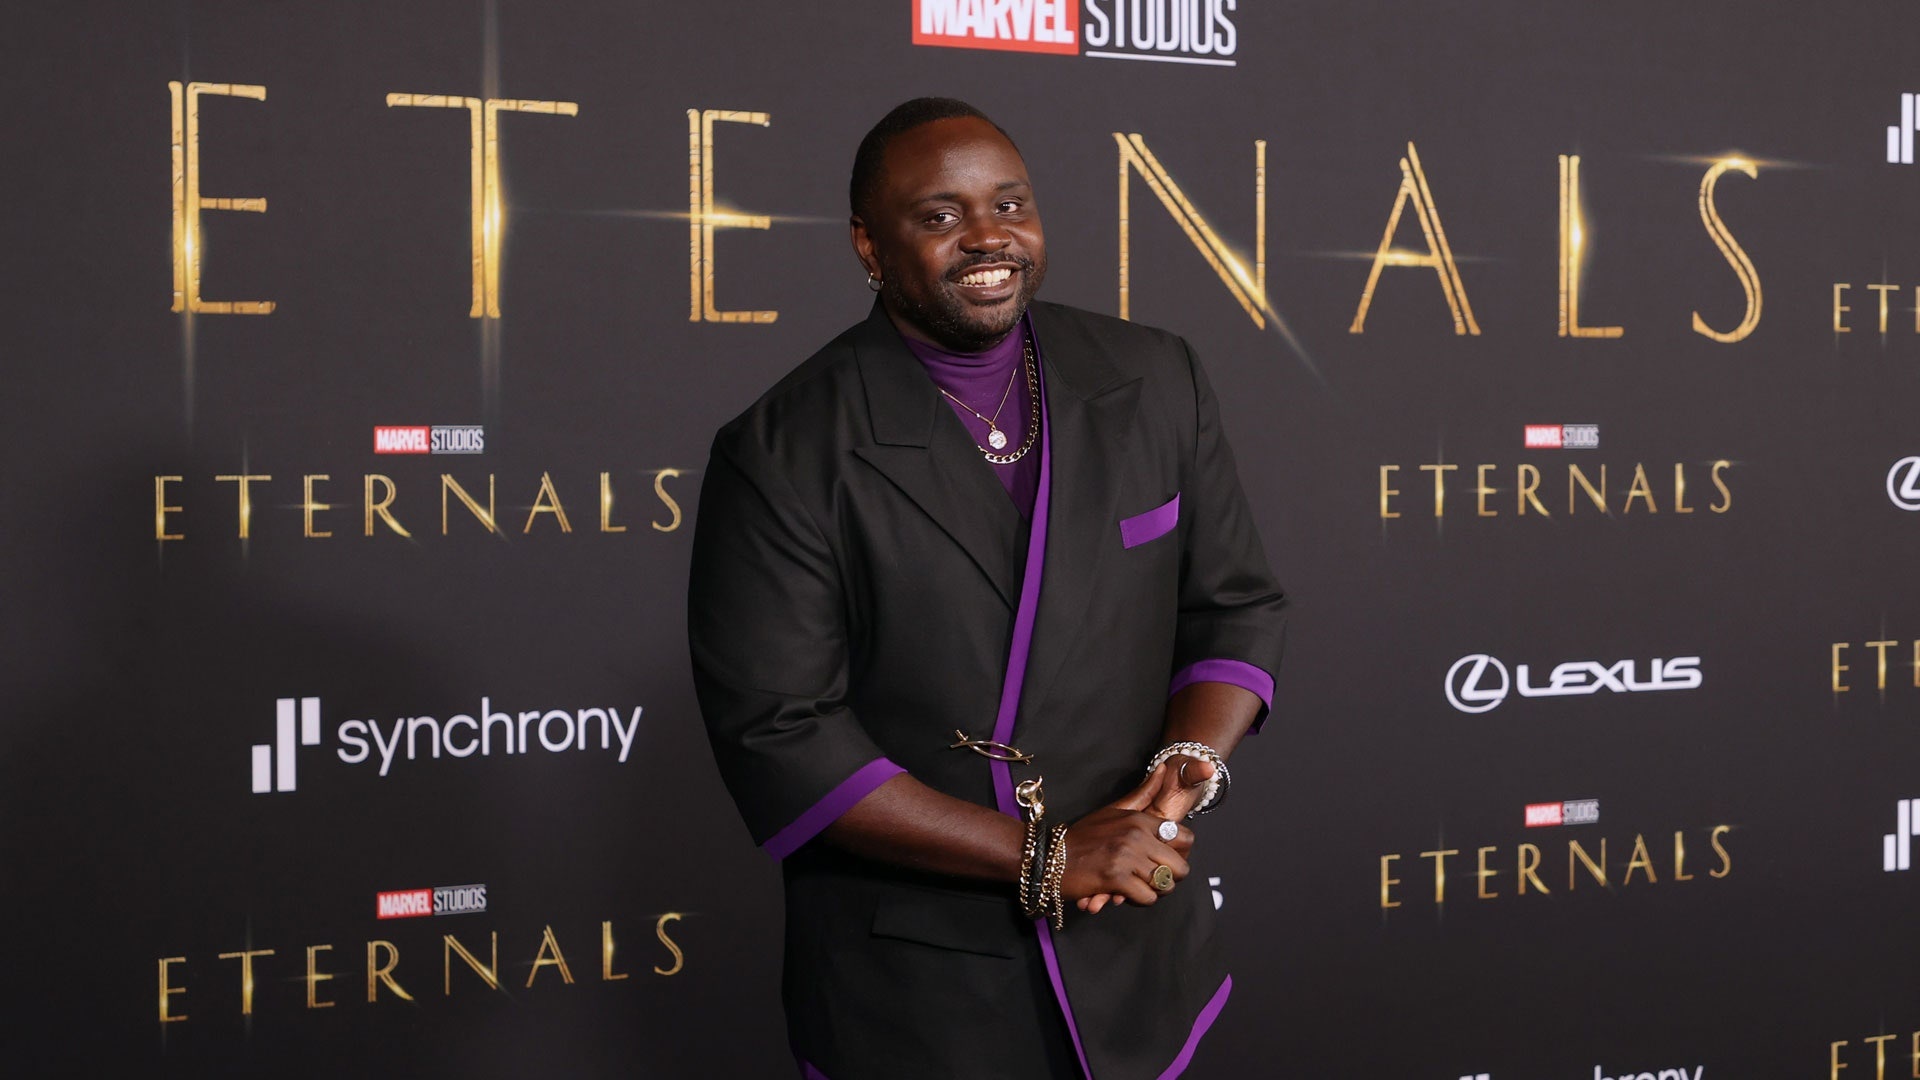 Brian Tyree Henry, Marvel Eternals, Thought-provoking role, LGBTQ+ representation, 1920x1080 Full HD Desktop